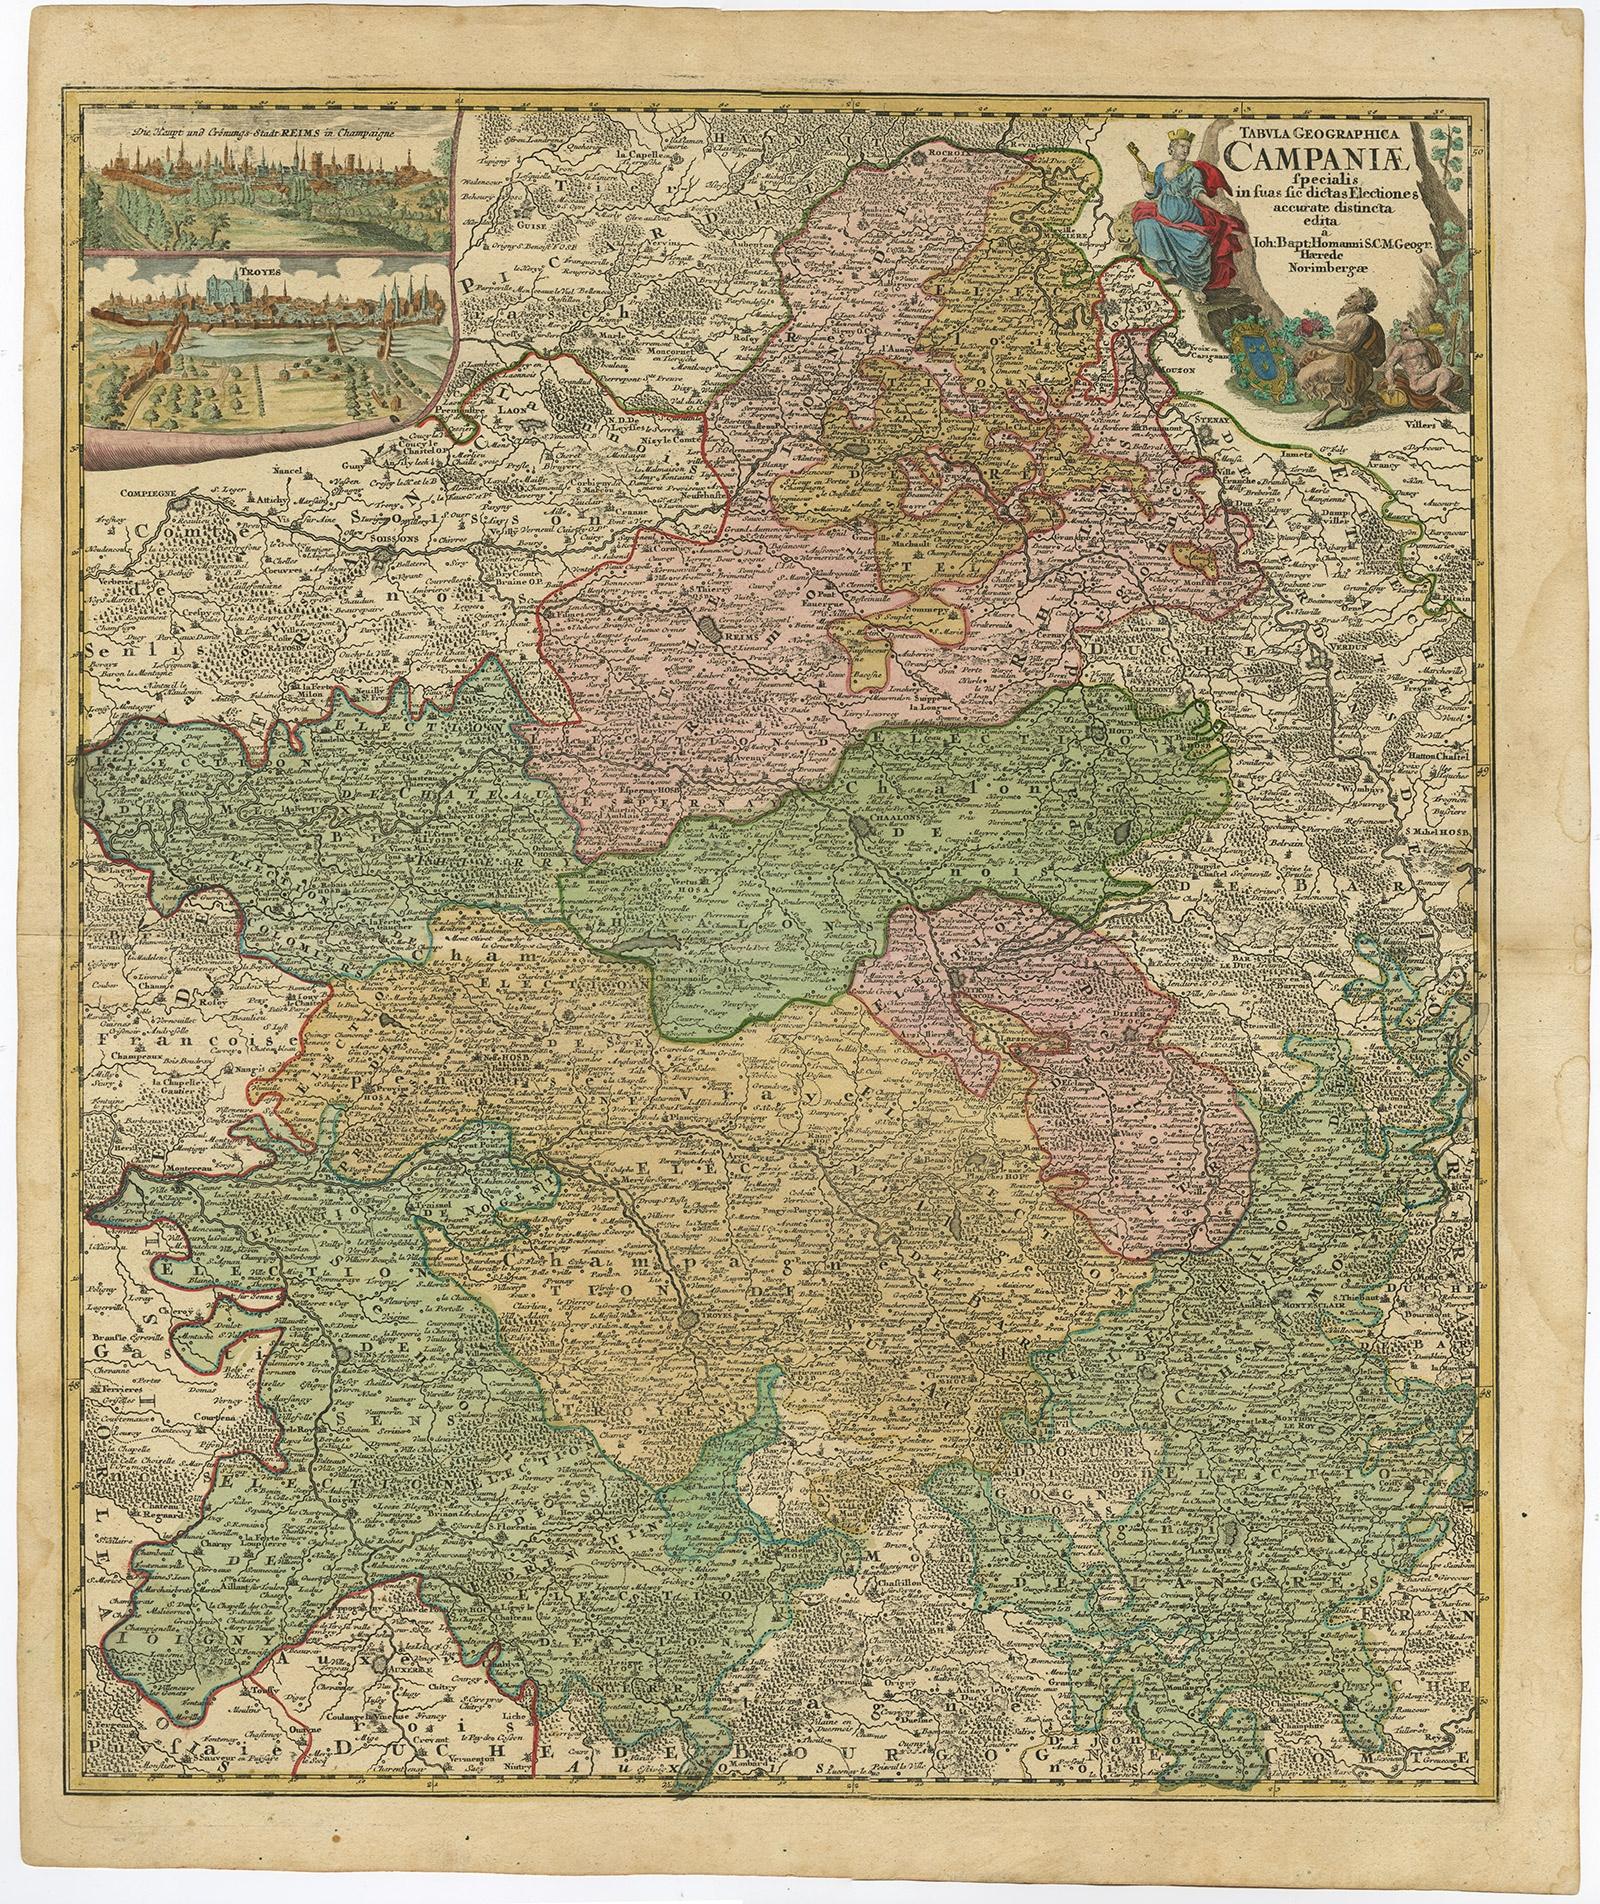 Antique map titled 'Tabula Geographica Campaniae (..).' 

Detailed map of the Champagne region in France by J. B. Homann, covering the region Champagne-Ardenne with Reims, Troyes and Épernay. The map shows an allegoric cartouche as well as two